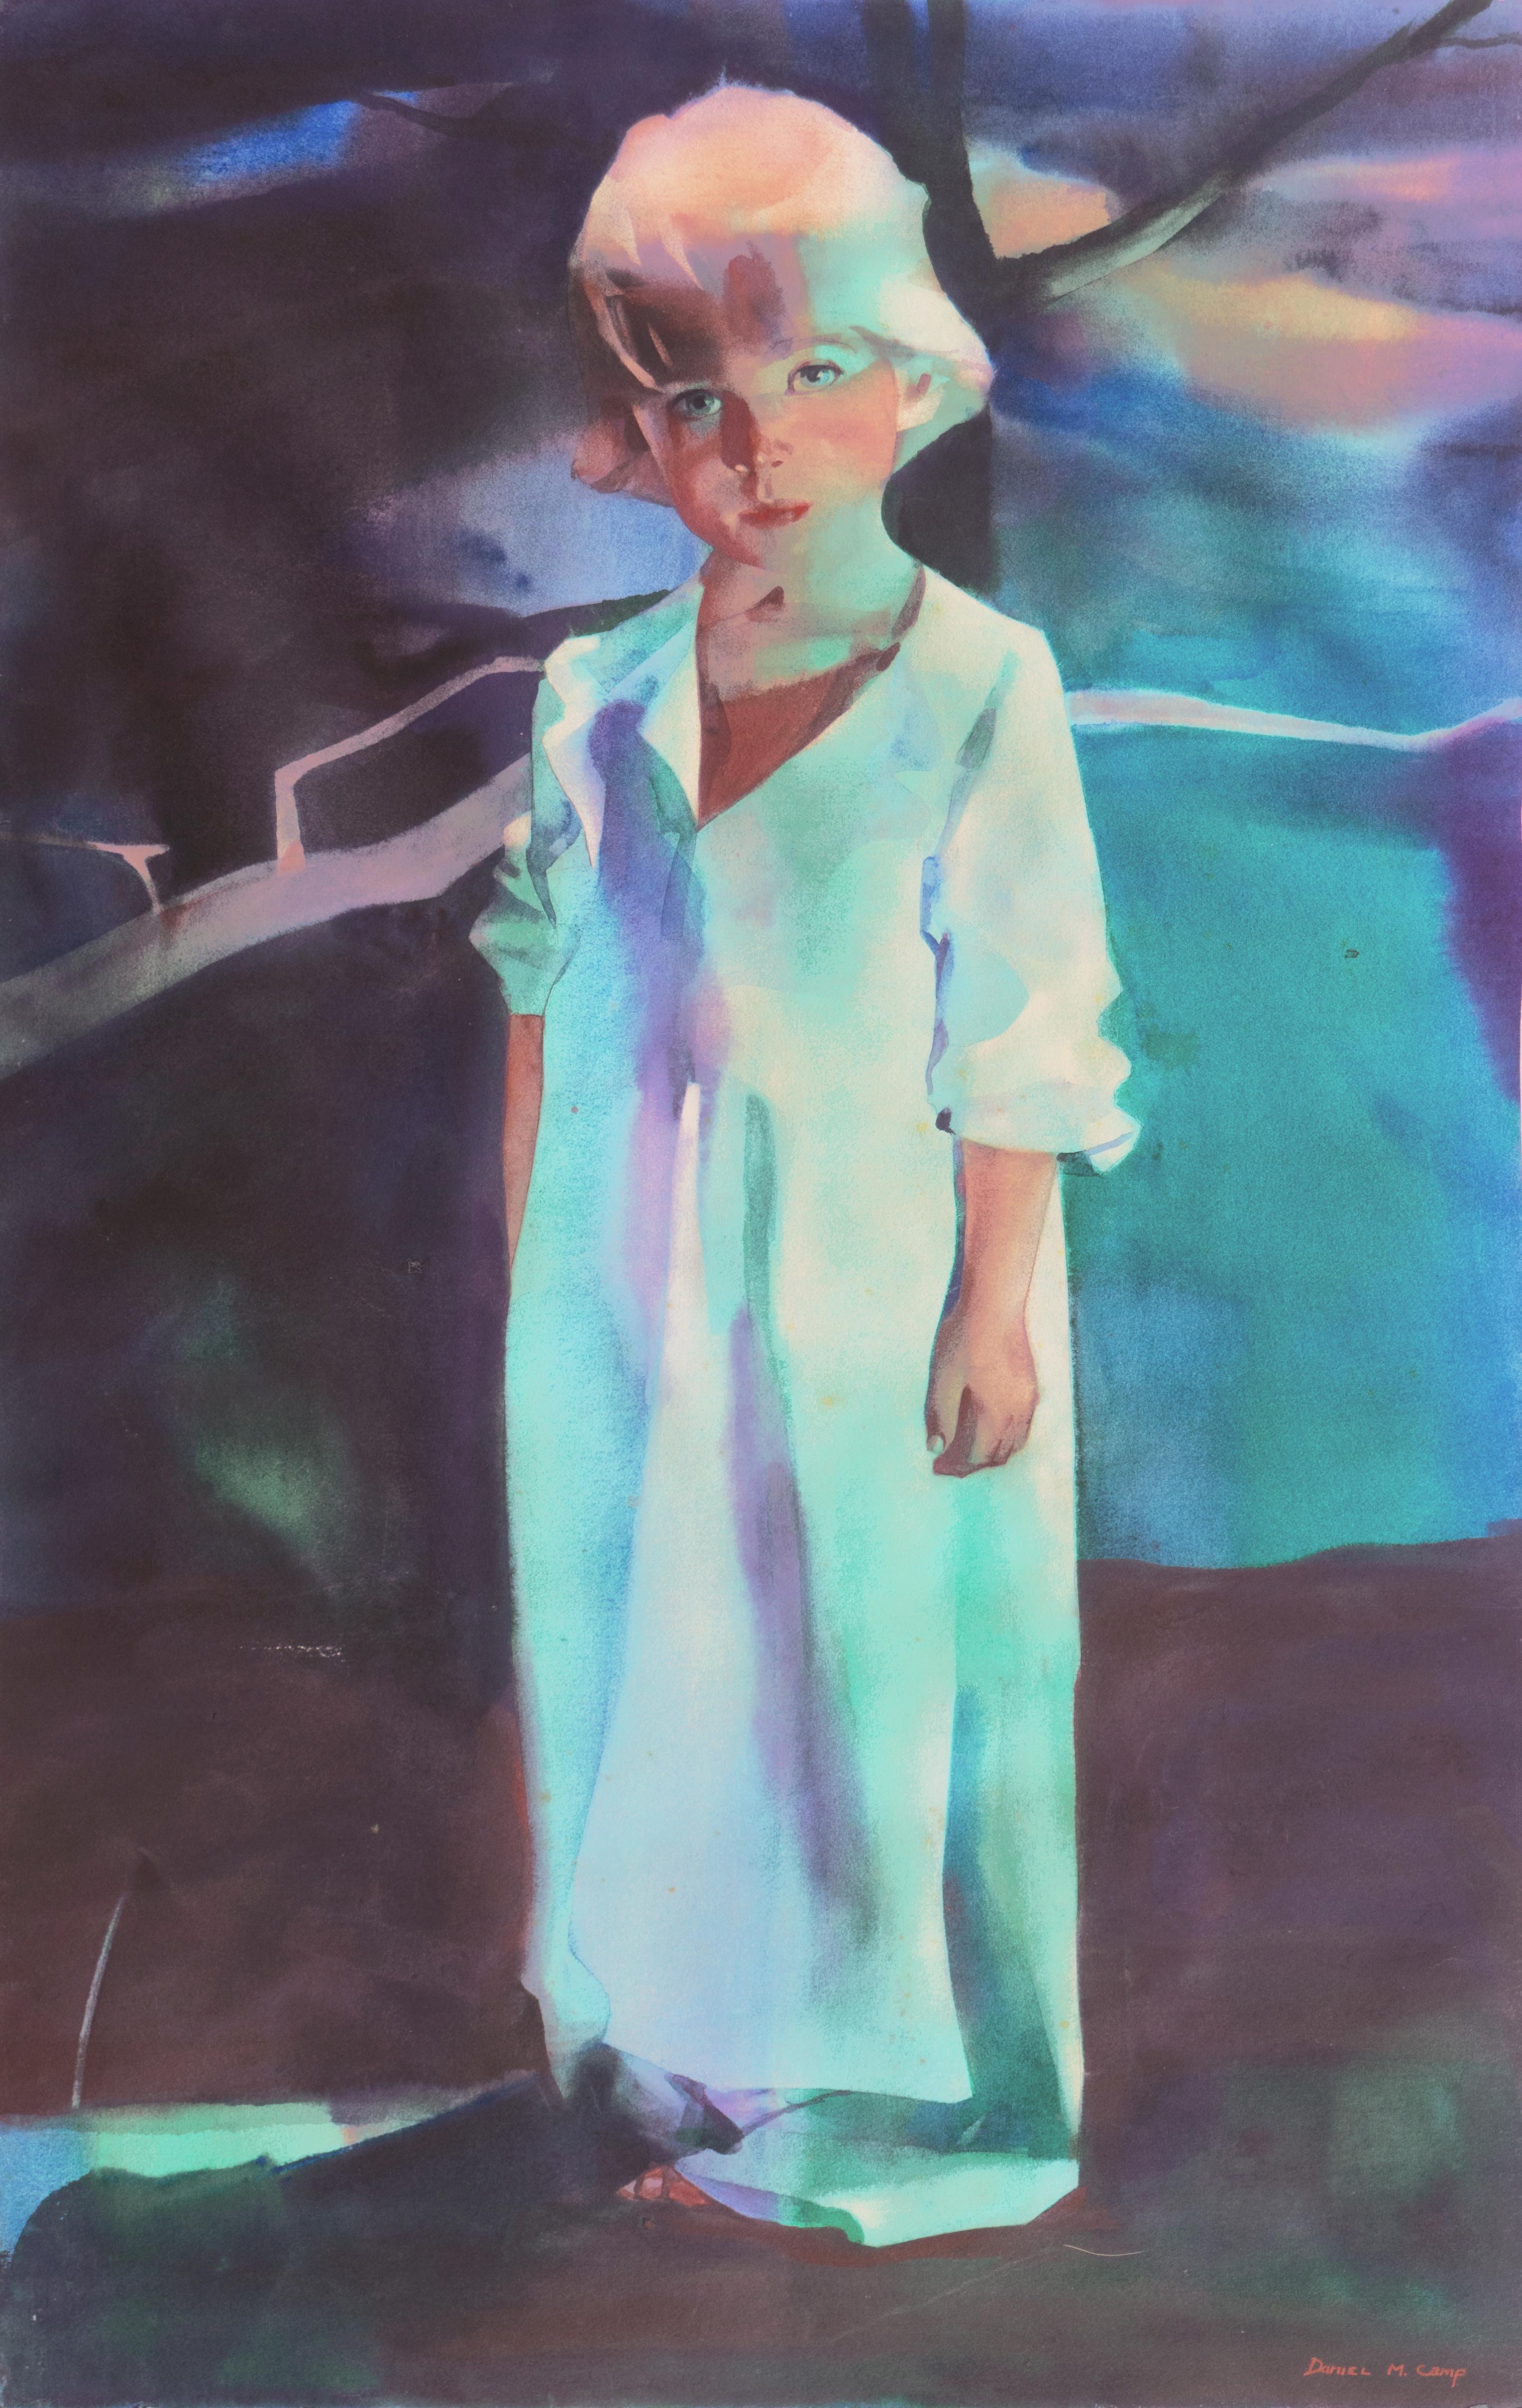 Daniel Camp Figurative Art - 'Abigail, by the Light of the Pool', San Diego Artist, Psychological Portraiture